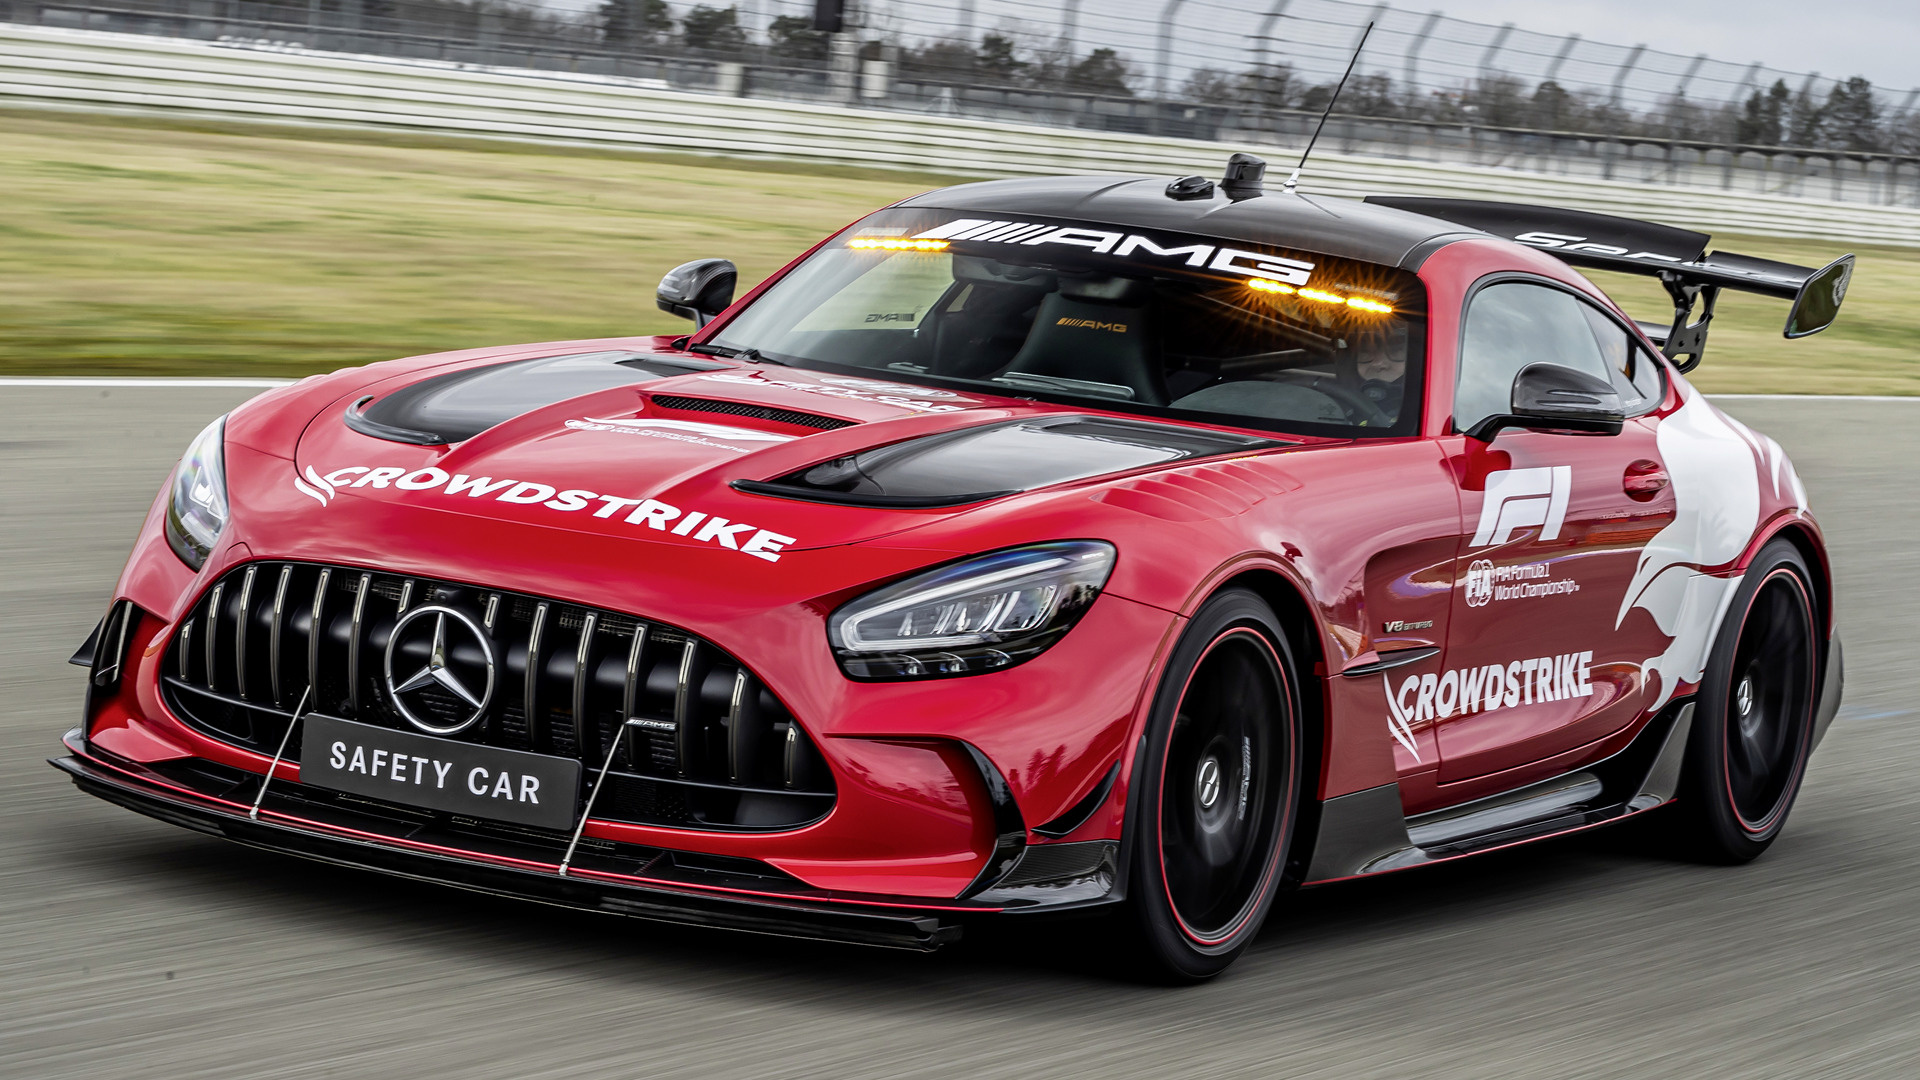 2022 MercedesAMG GT Black Series F1 Safety Car Wallpapers and HD